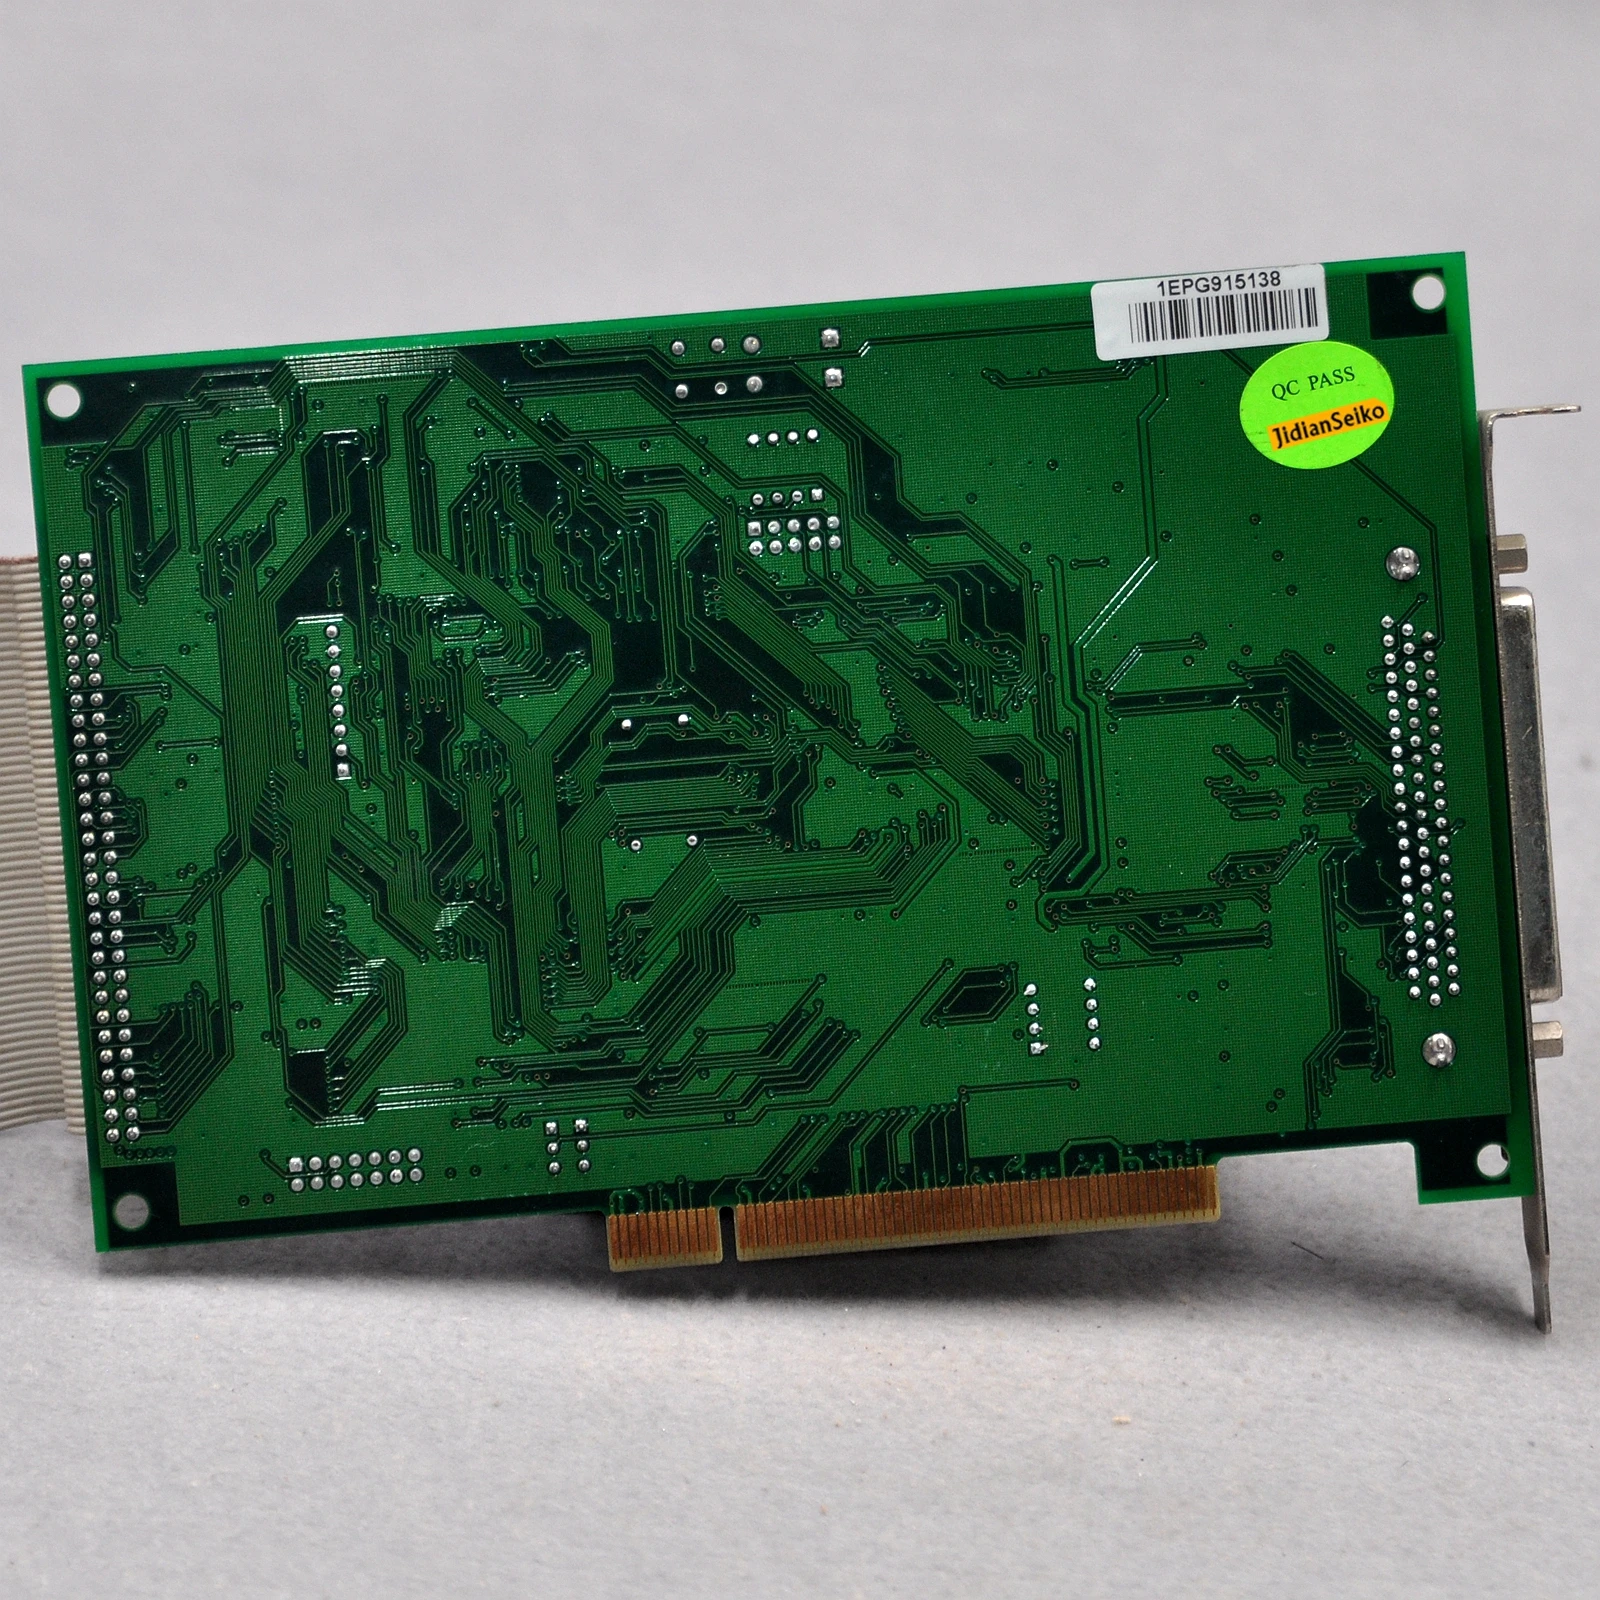 Details about   GOOGOLTECH GX-PCI GE-800-PG Motion Control Card as photo sn:Ramdom 